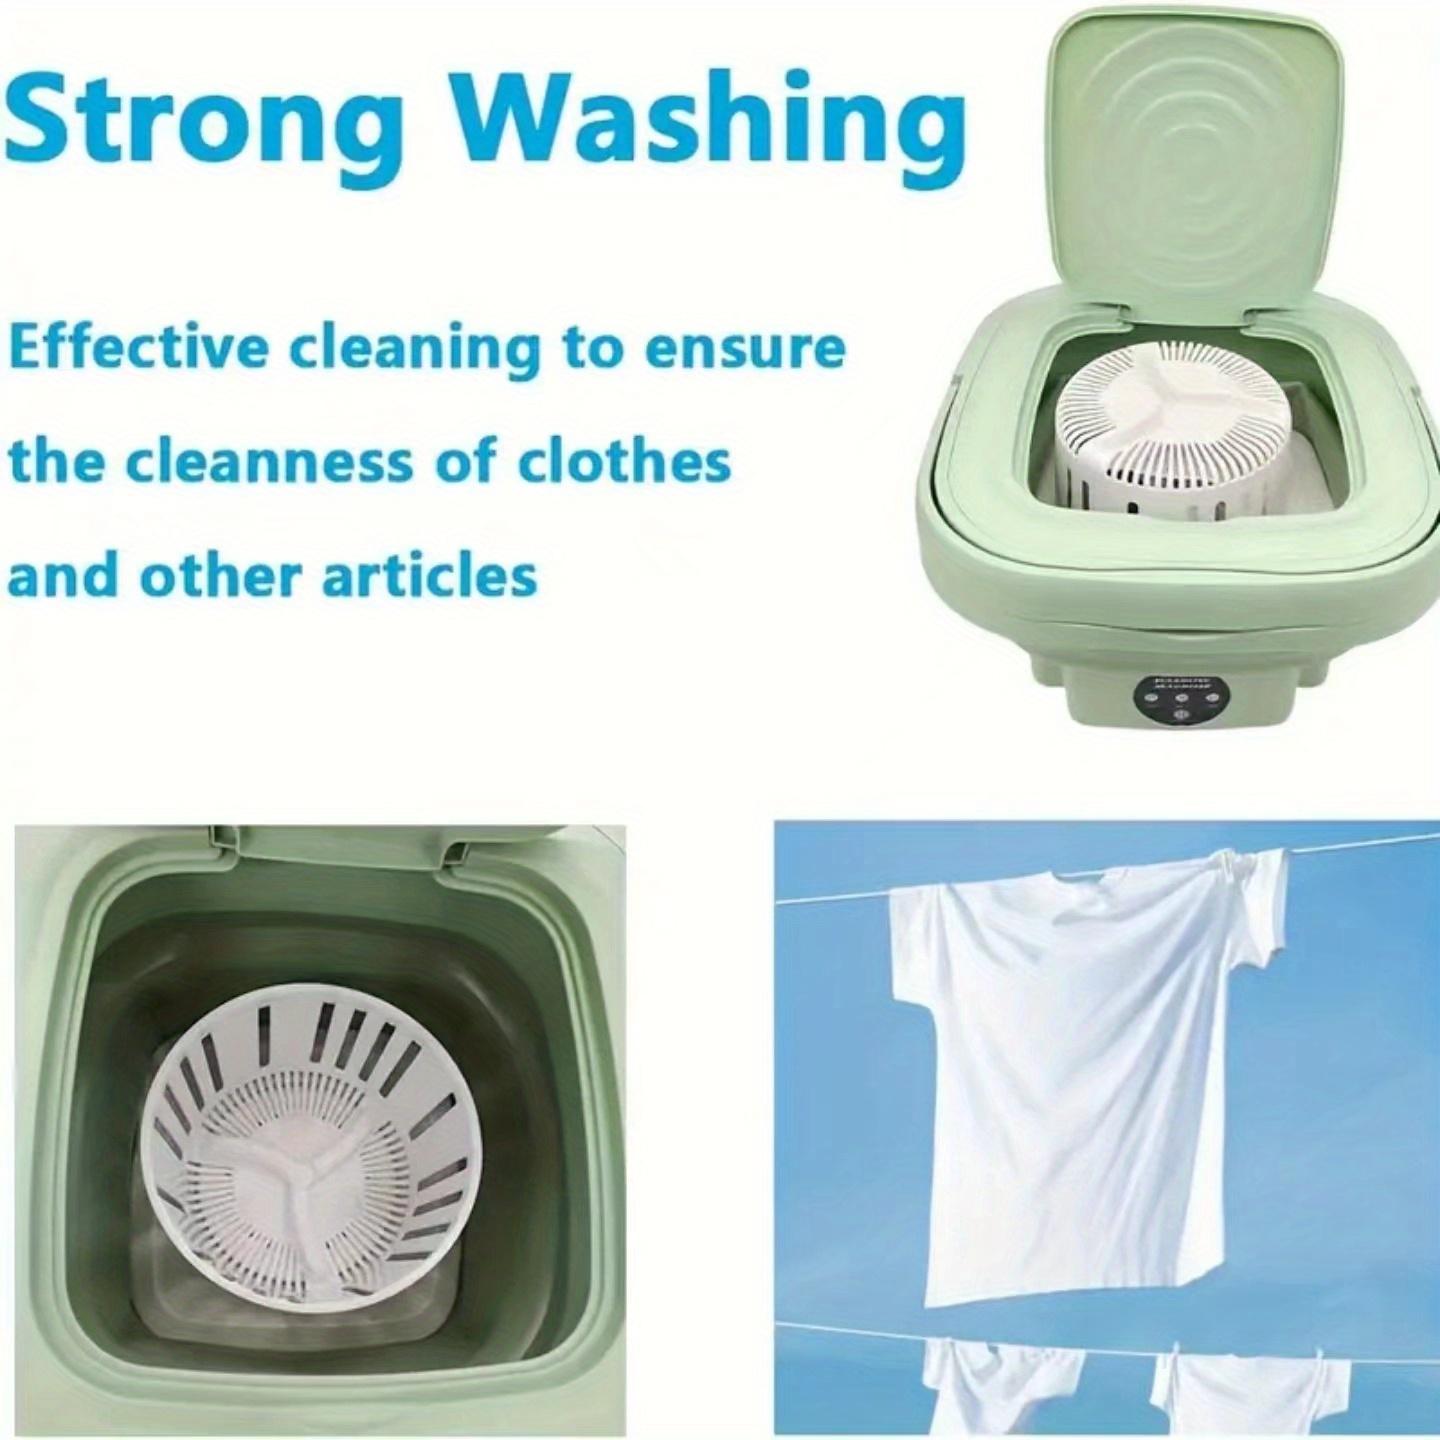 Desktop 2.8 Liter Washing Machine Portable Personal Underwear Laundry  Washer Small Wash Travel Camping Cleaning Apartment Dorm Green US Plug